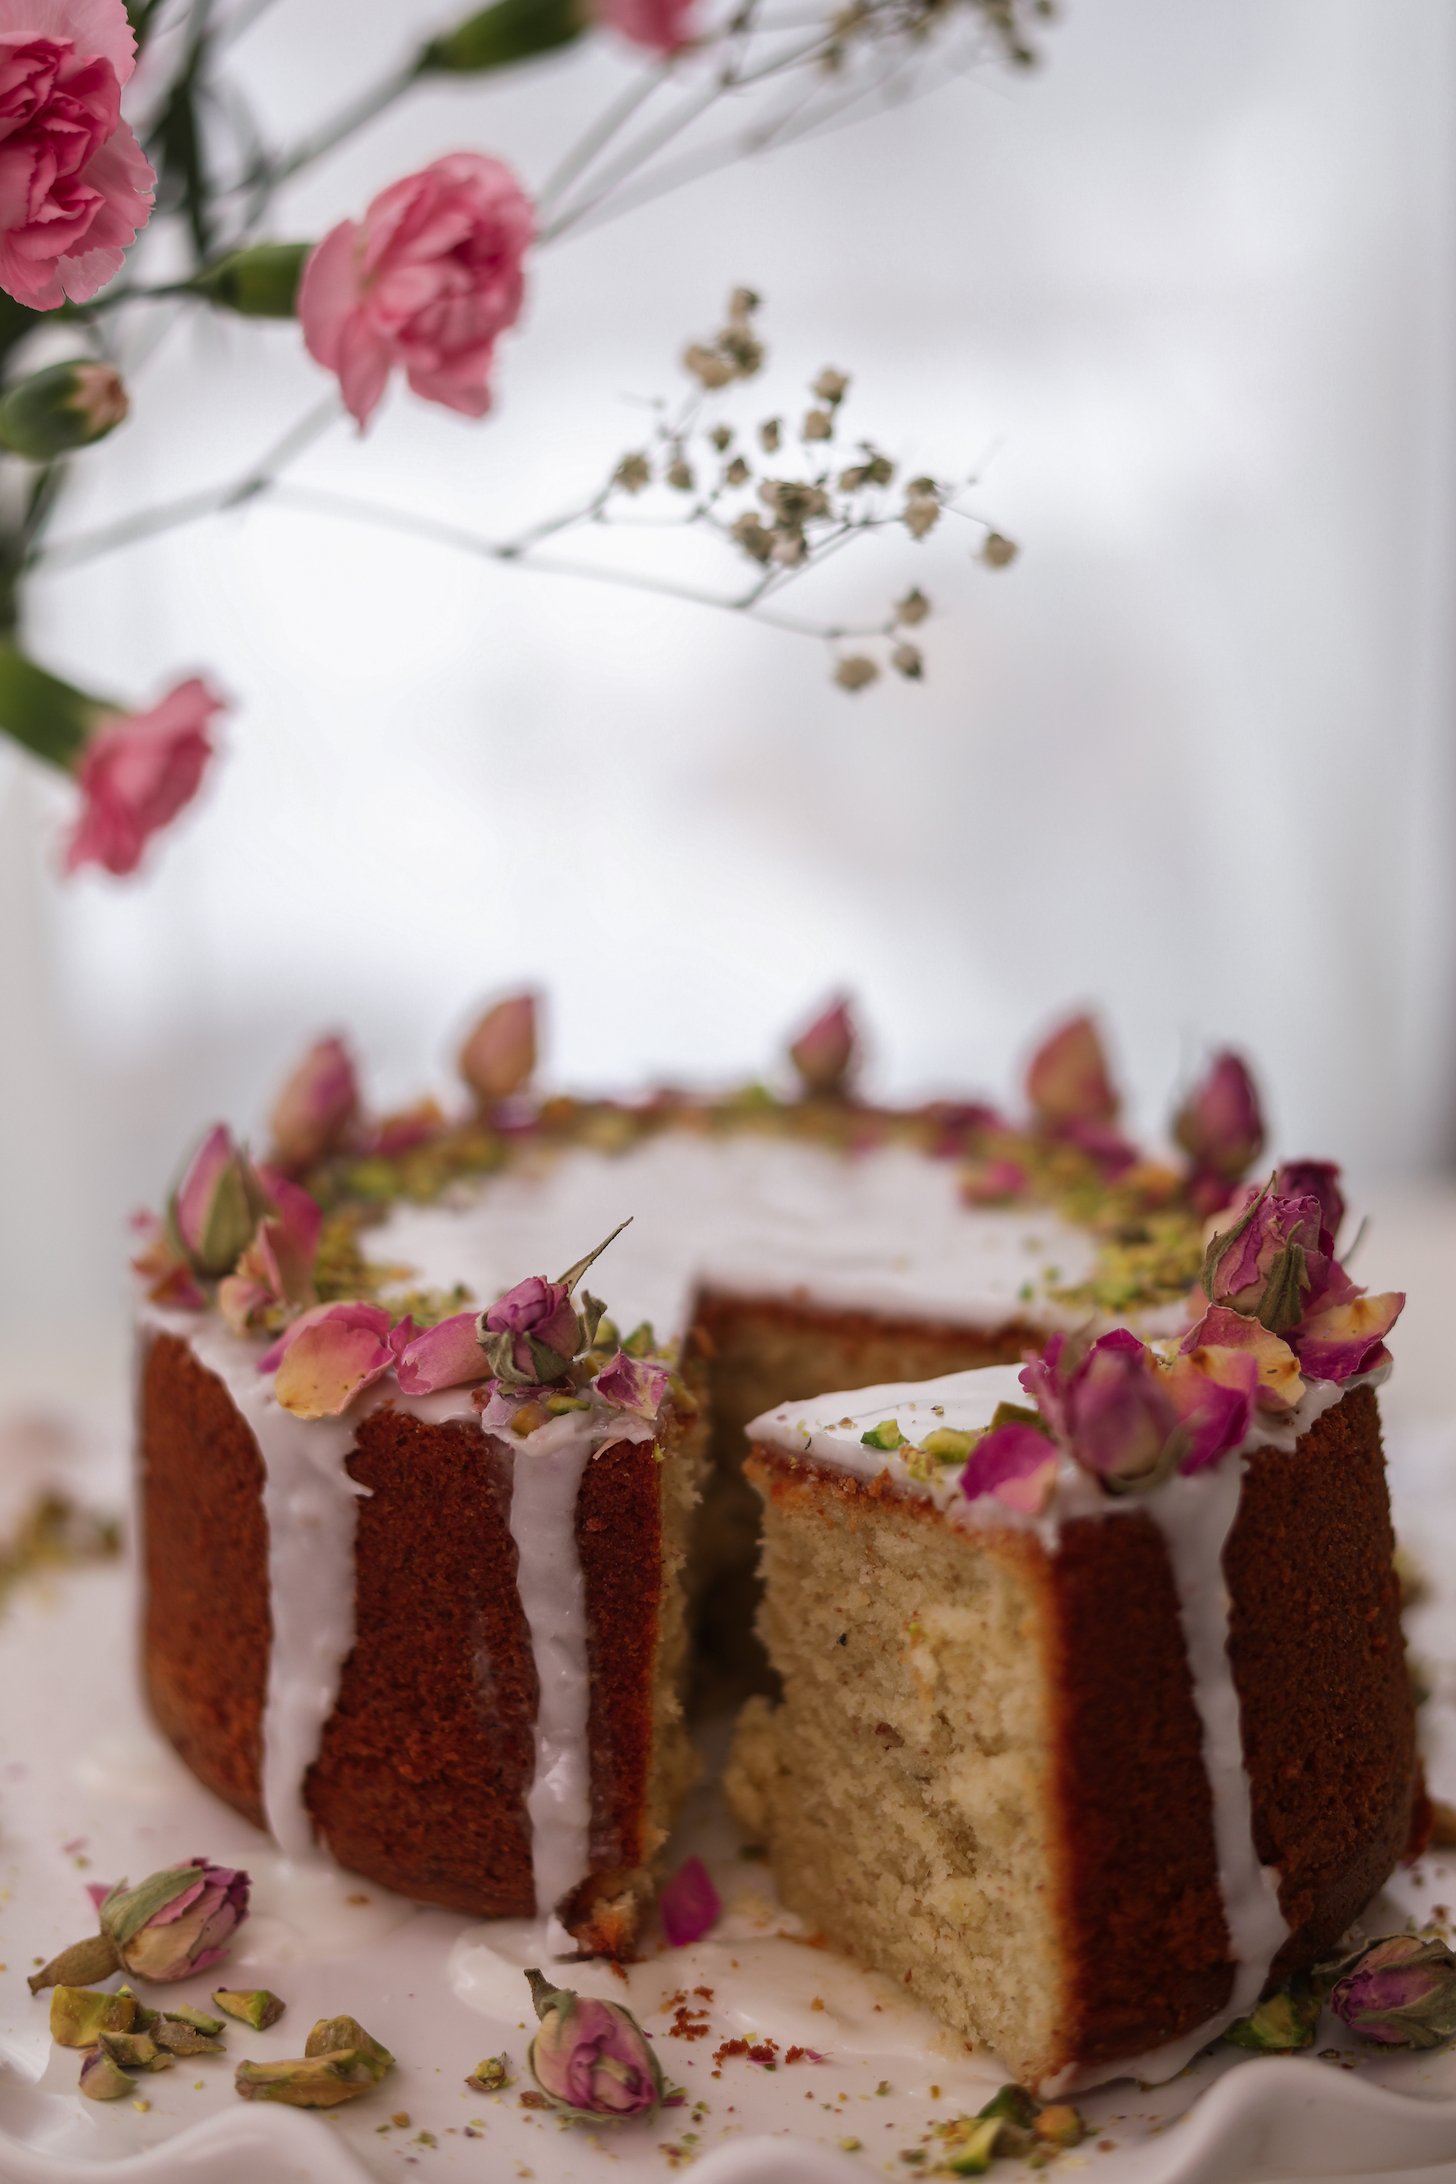 A perspective image of a cake with dripping white icing, dried roses, and crushed pistachios on top. A slice is pulled out and there are pink flowers lean over the cake.